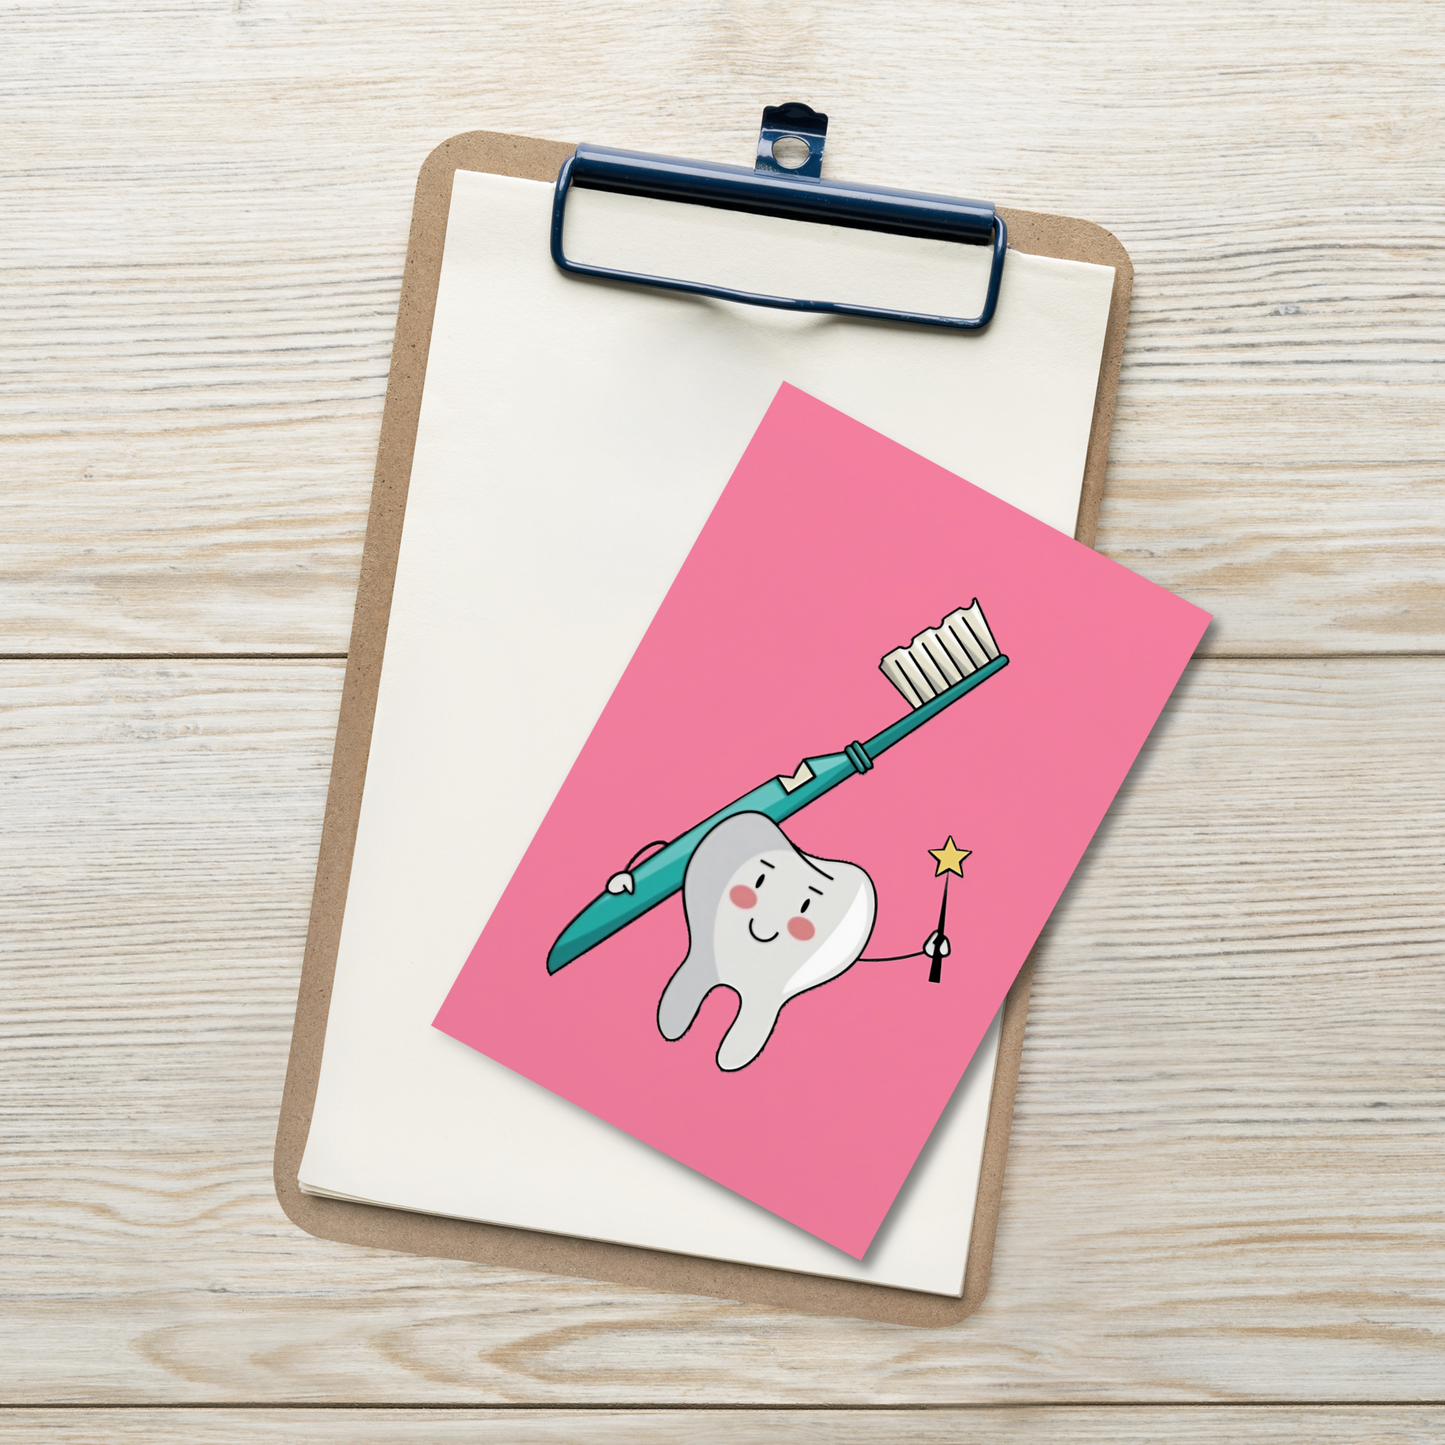 Dental Motivational & Reward Cards- Tooth holding green toothbrush and a magic wand